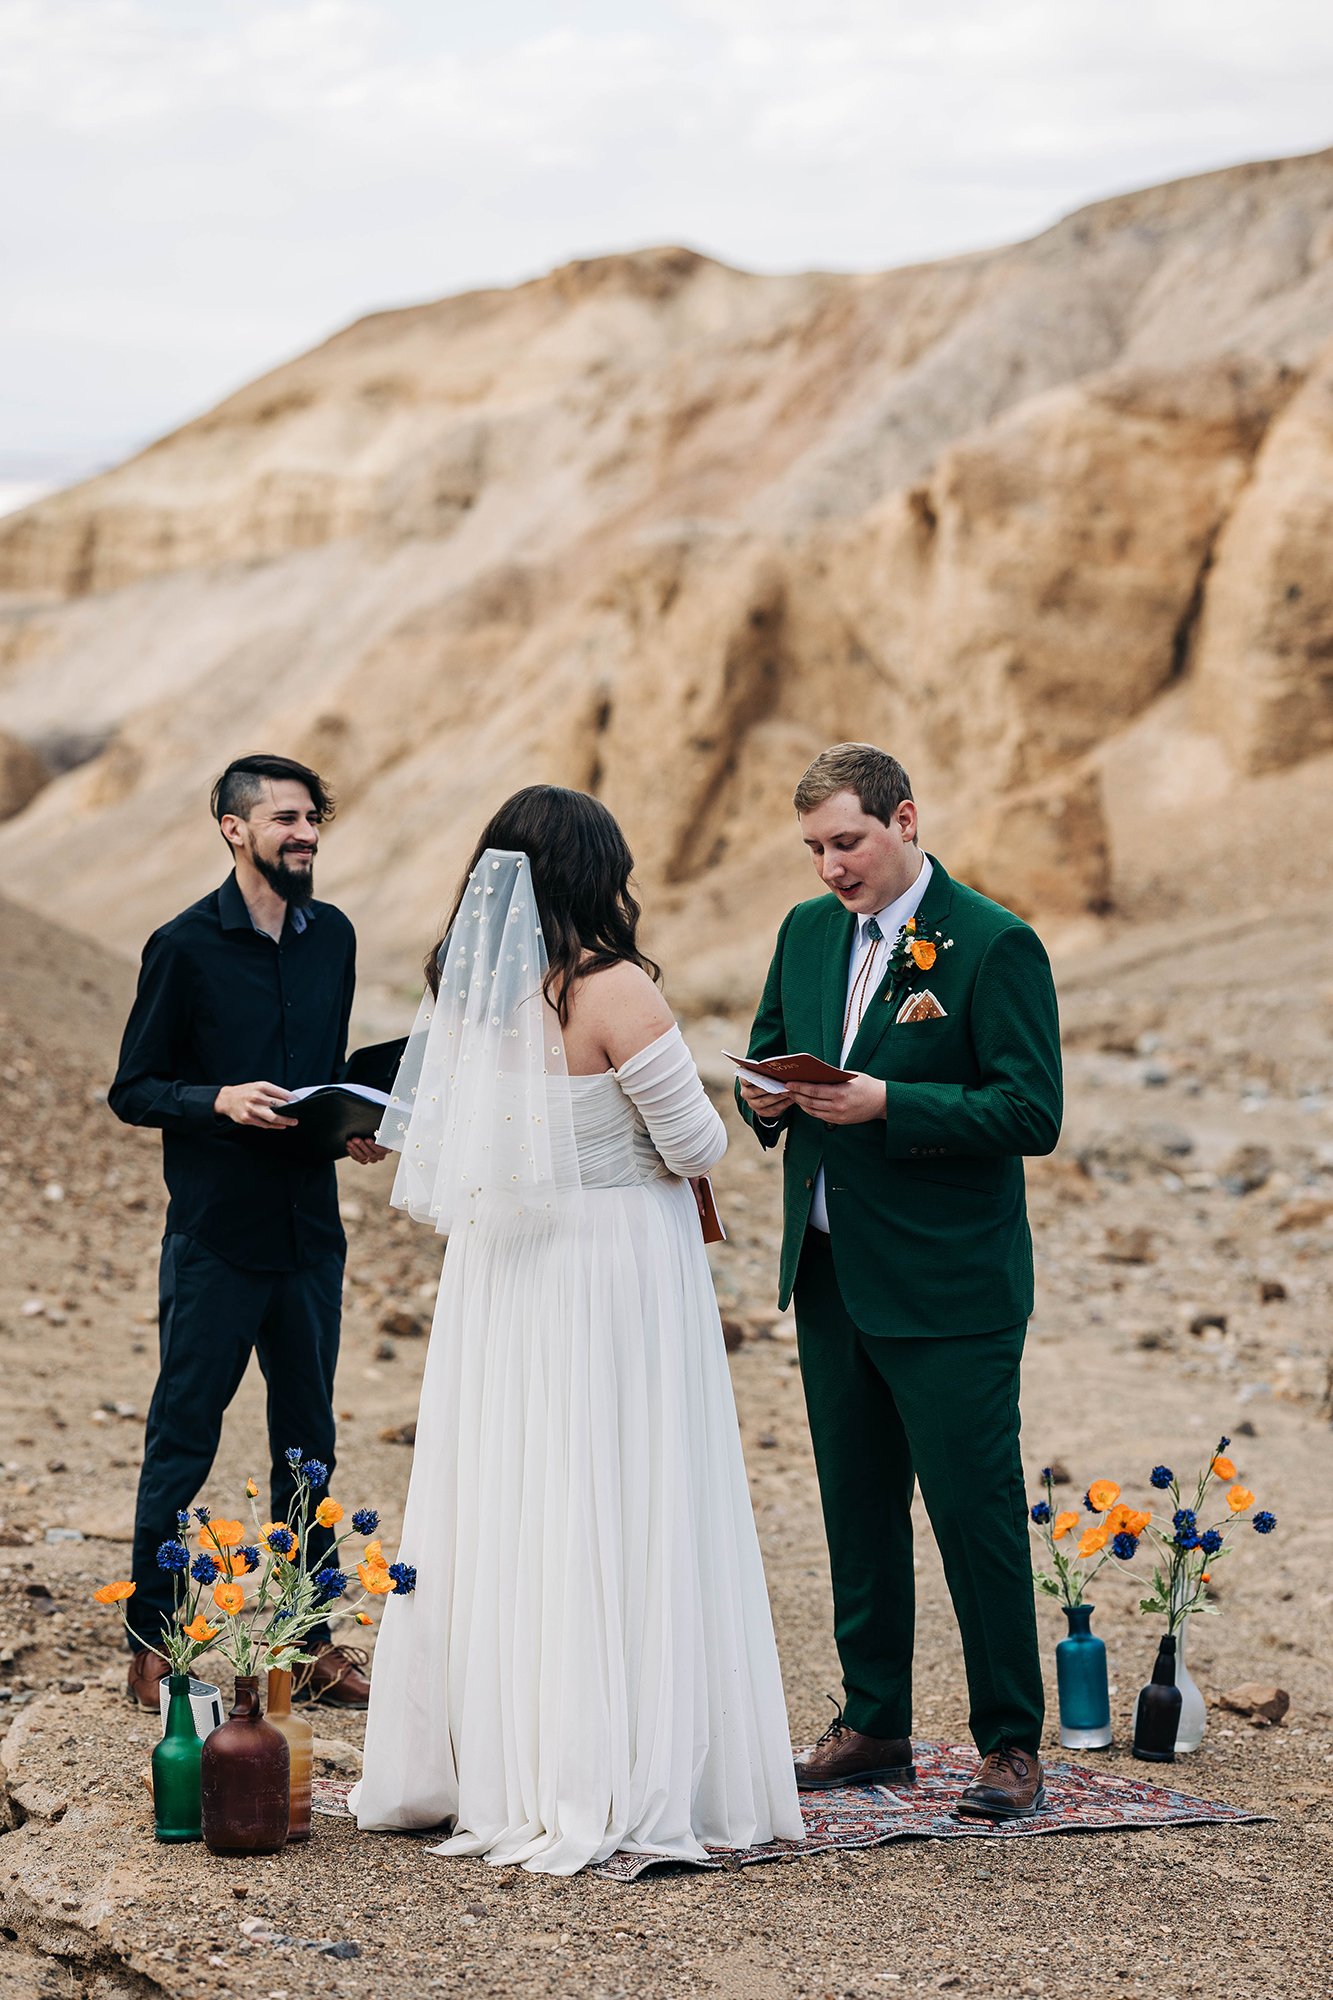 A groom reads his vows to his bride on their wedding day in Death Valley National Park.